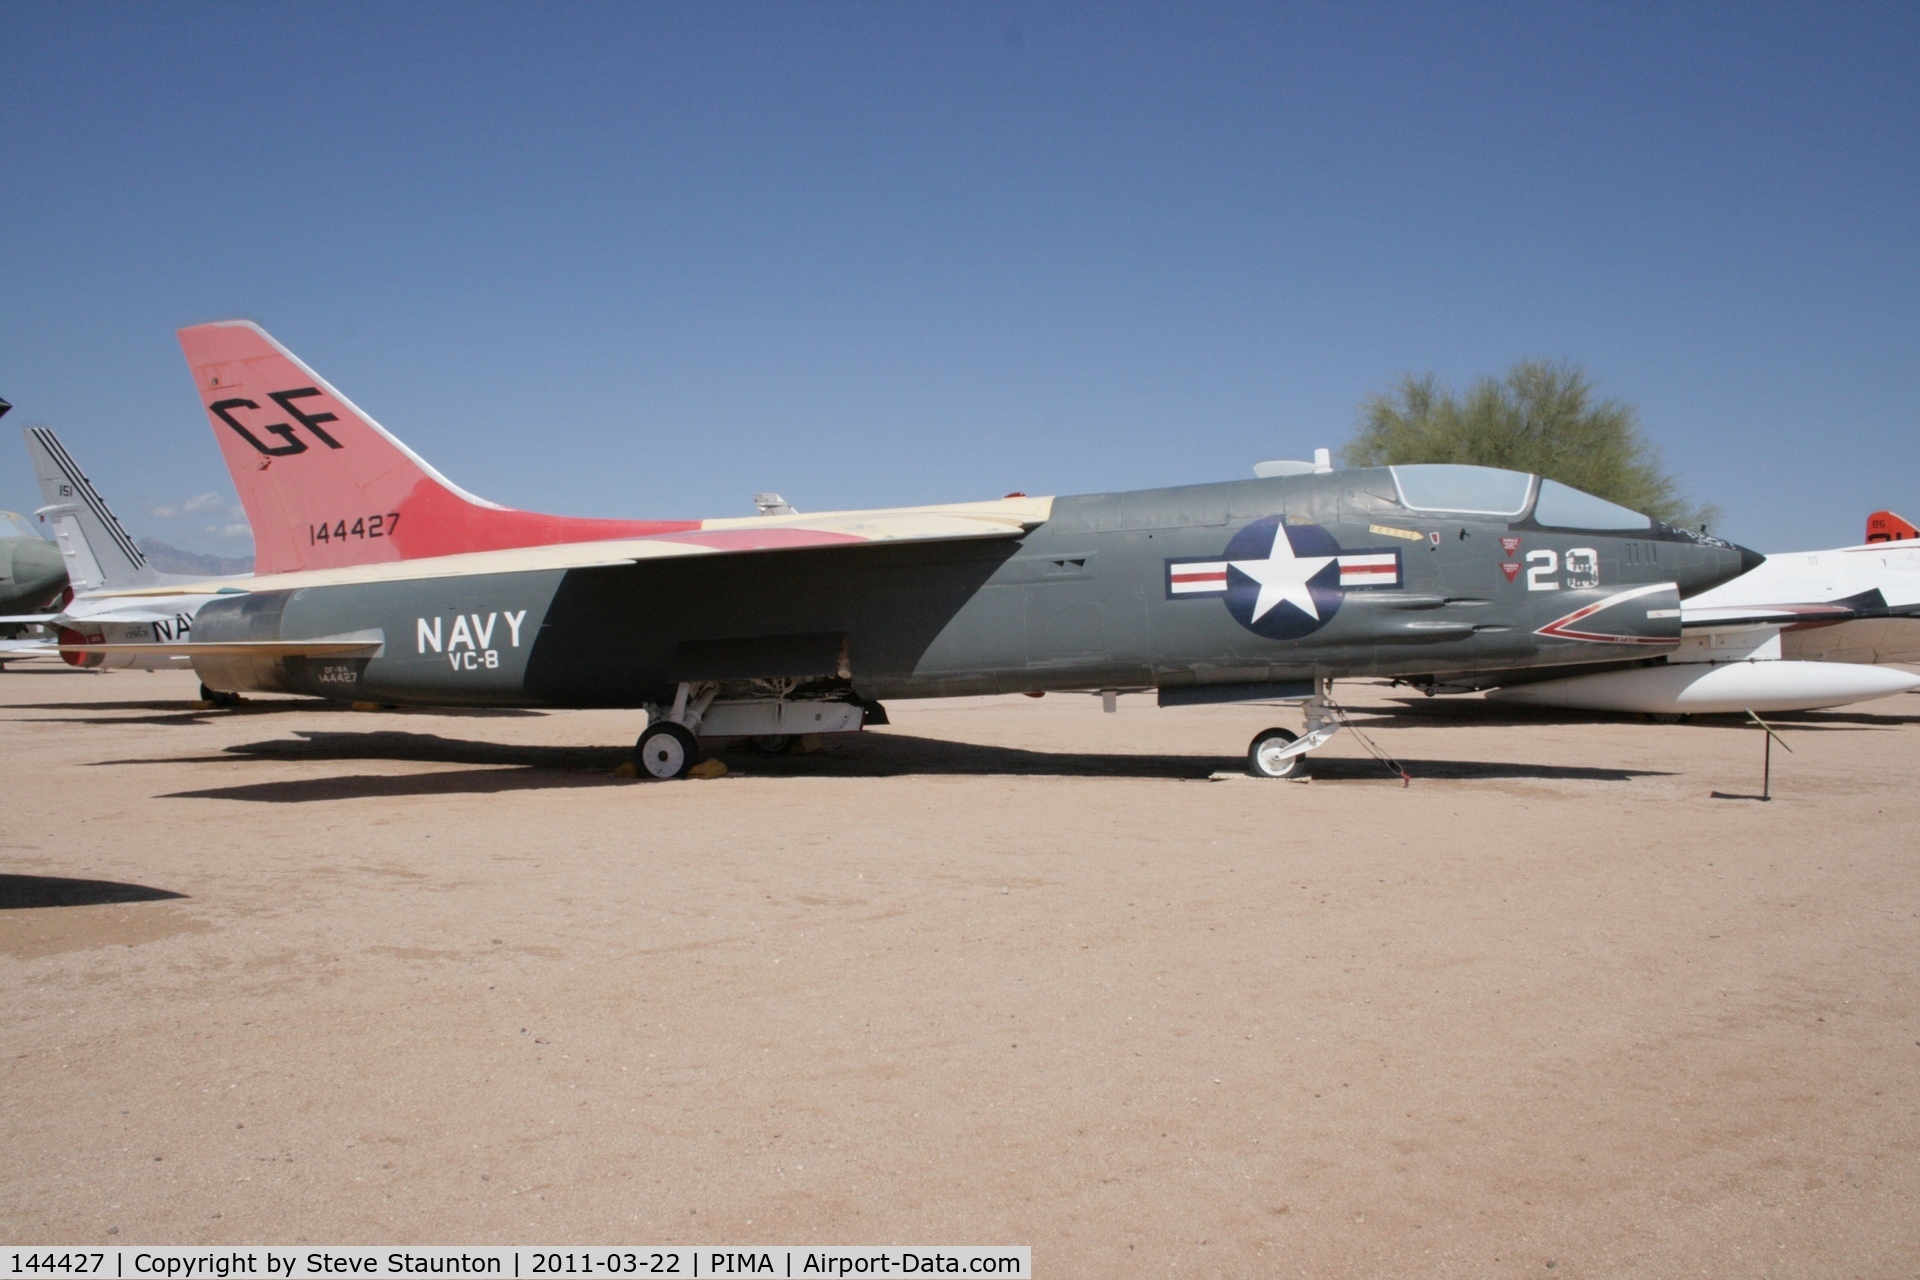 144427, Vought DF-8F Crusader C/N GF-29, Taken at Pima Air and Space Museum, in March 2011 whilst on an Aeroprint Aviation tour